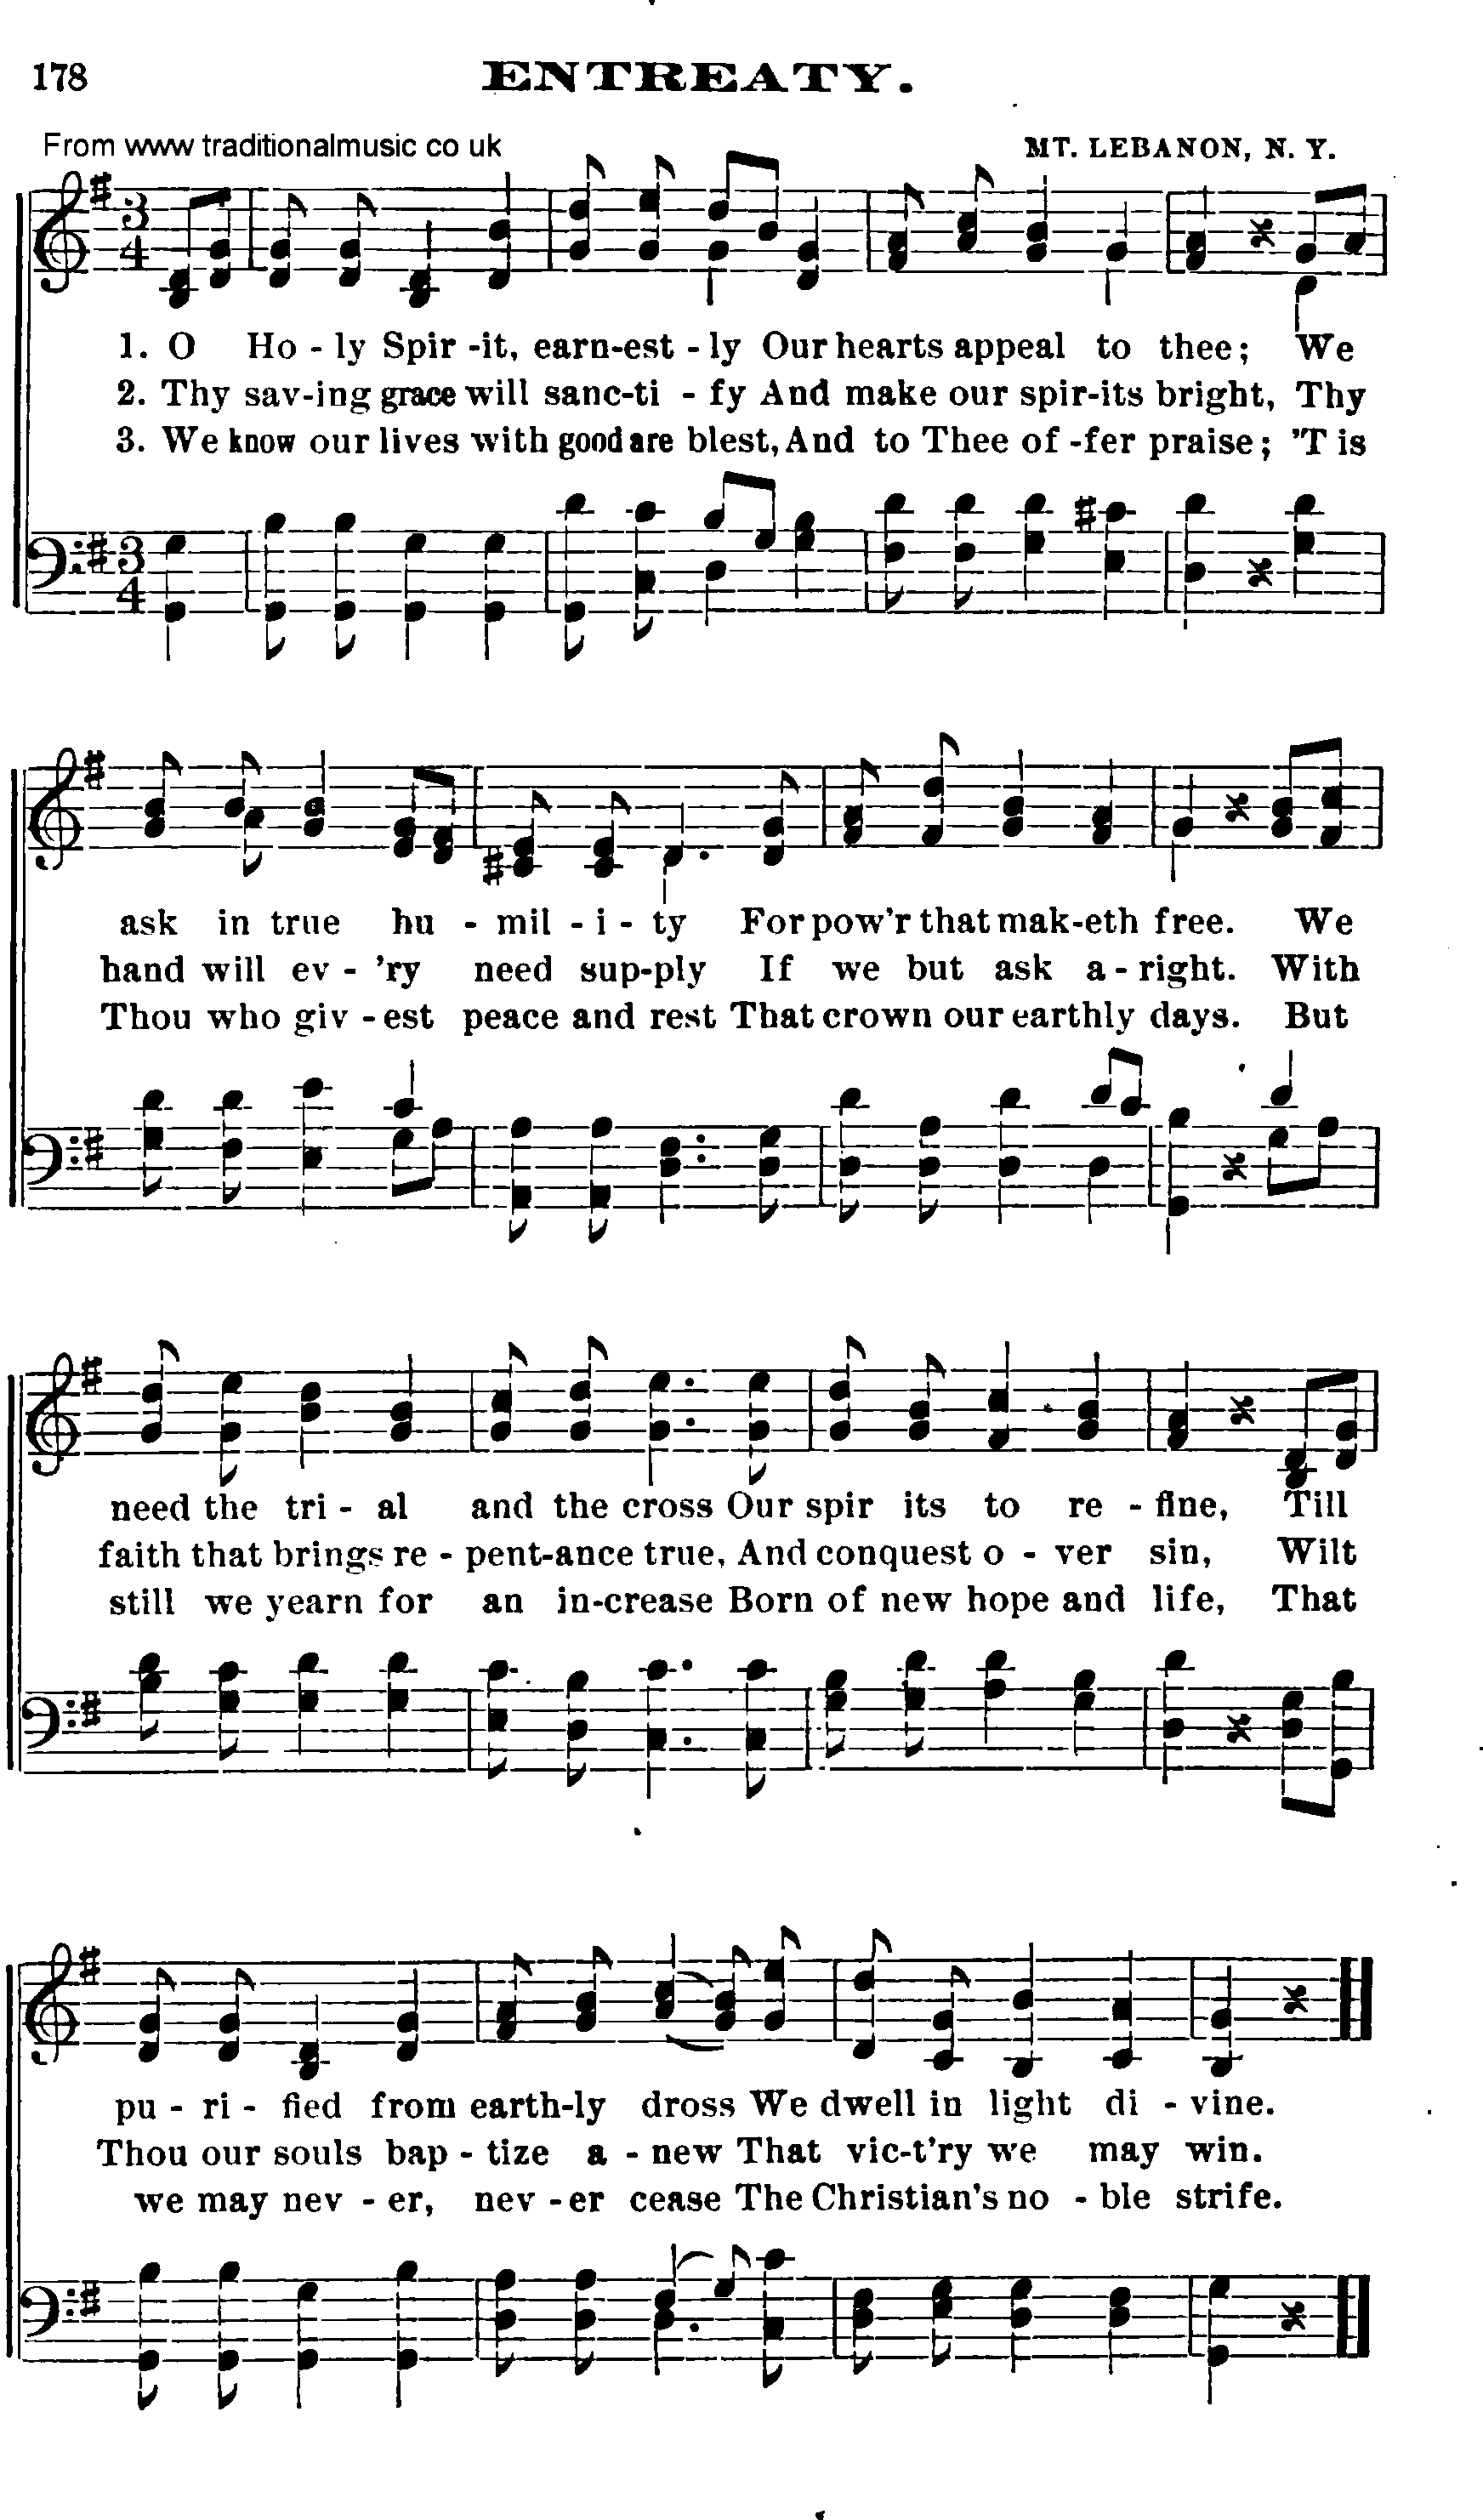 Shaker Music collection, Hymn: entreaty, sheetmusic and PDF